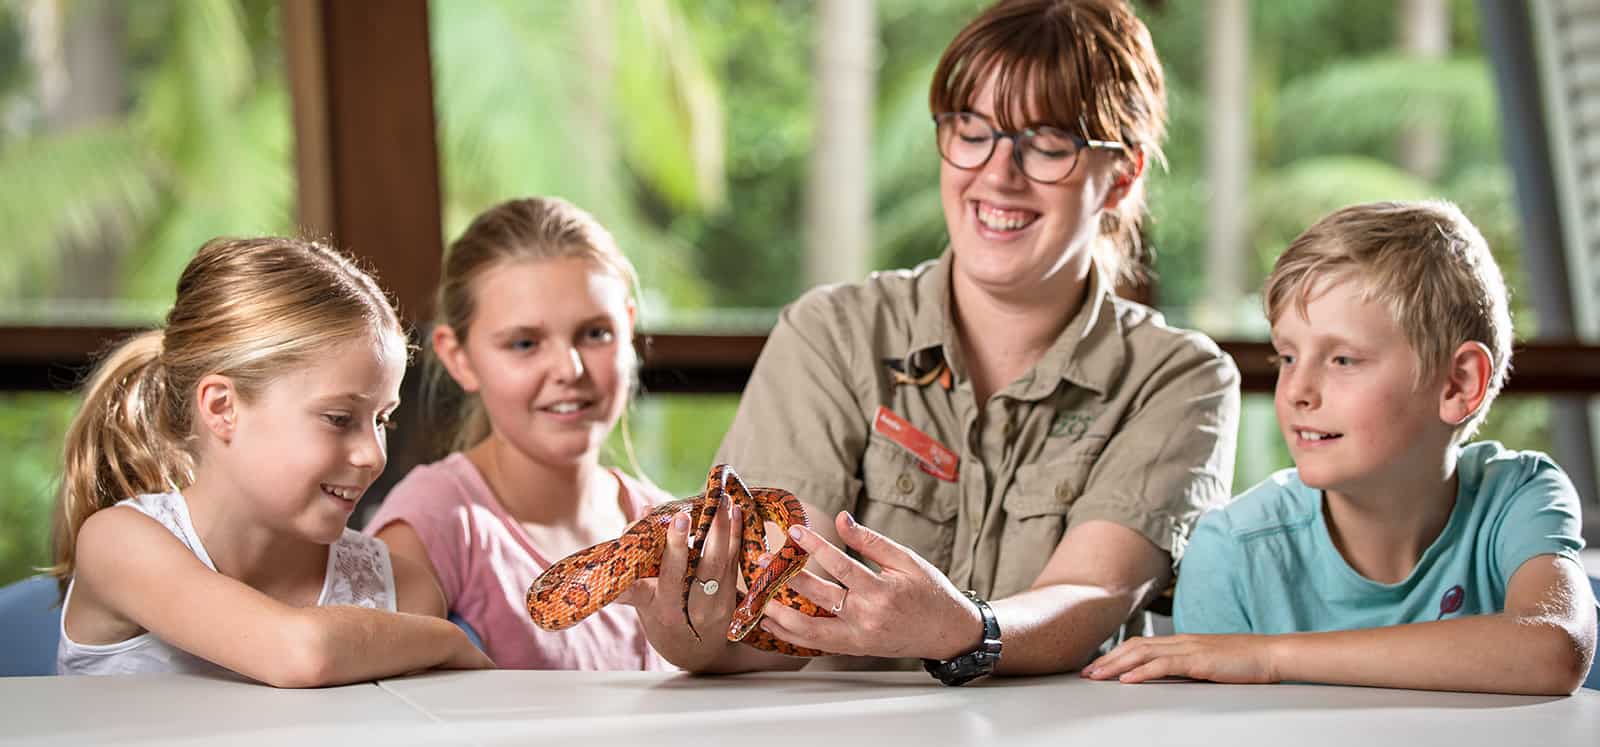 Kids smiling as Adelaide Zoo keeper holds snake